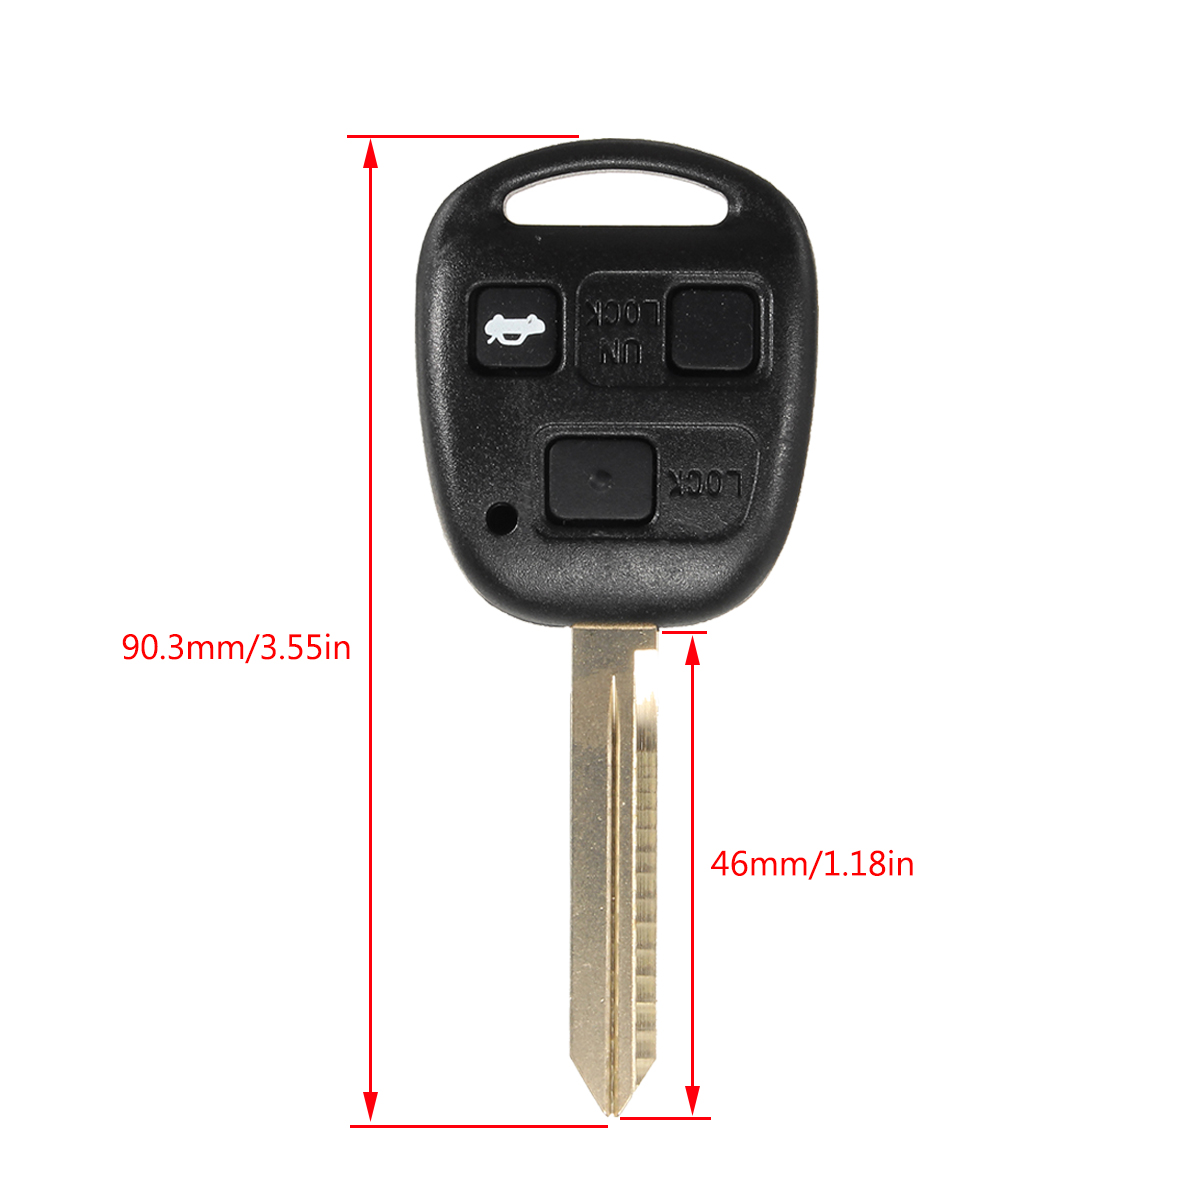 Fits Toyota Yaris Avensis Corolla Carina 2 button remote fob case toy 47 Valeo 